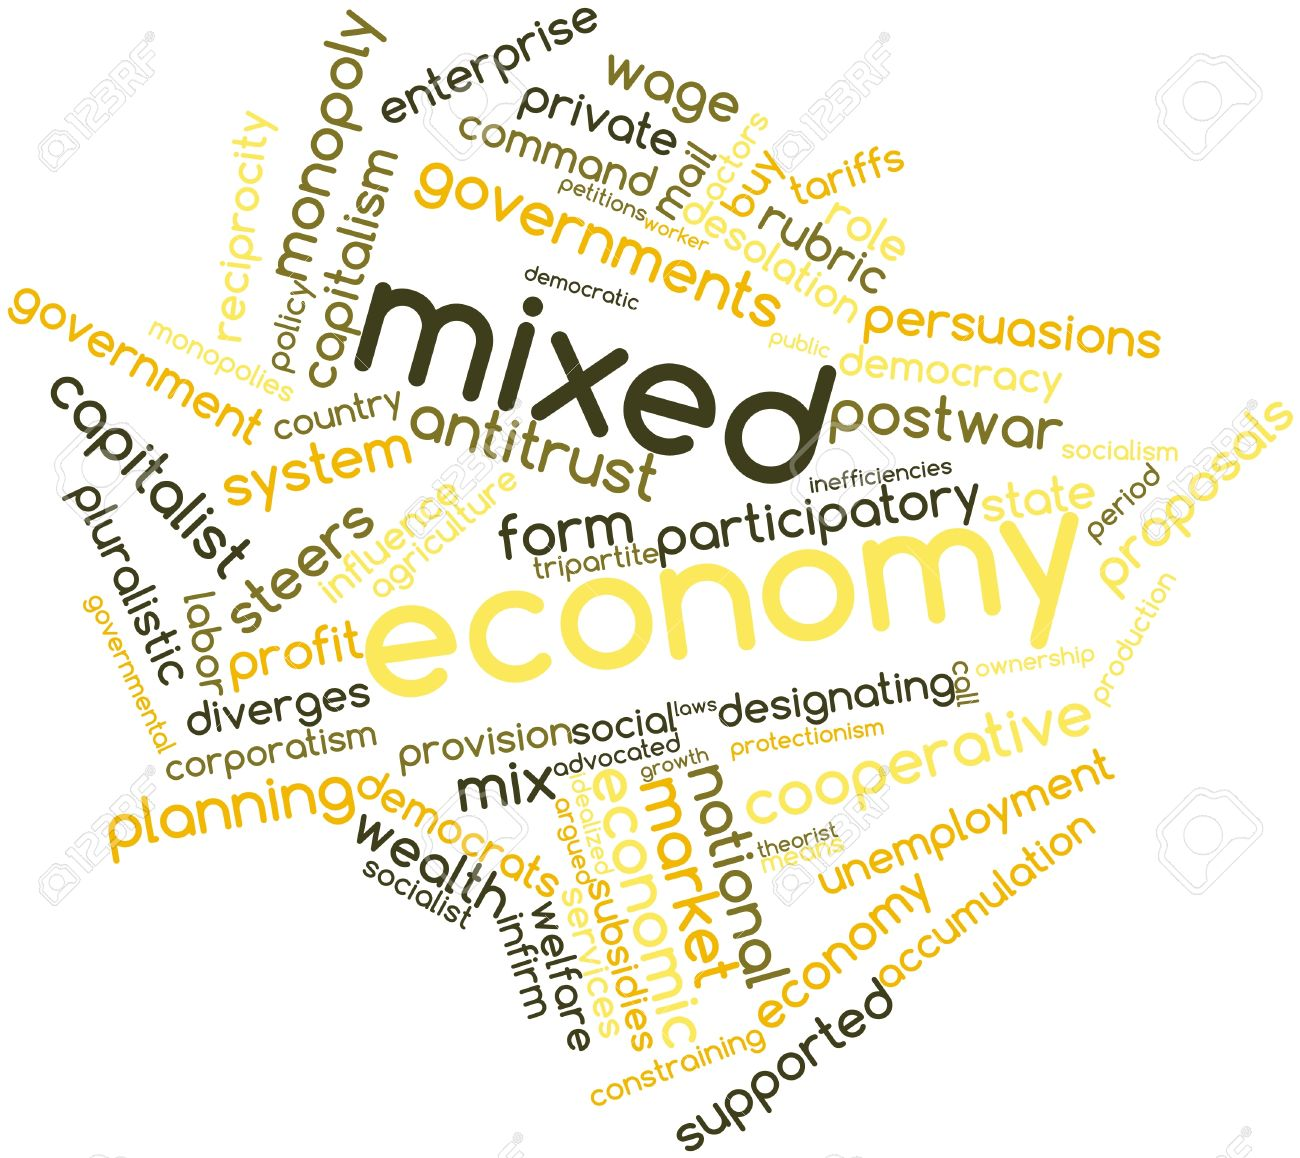 A mixed economy system is an 